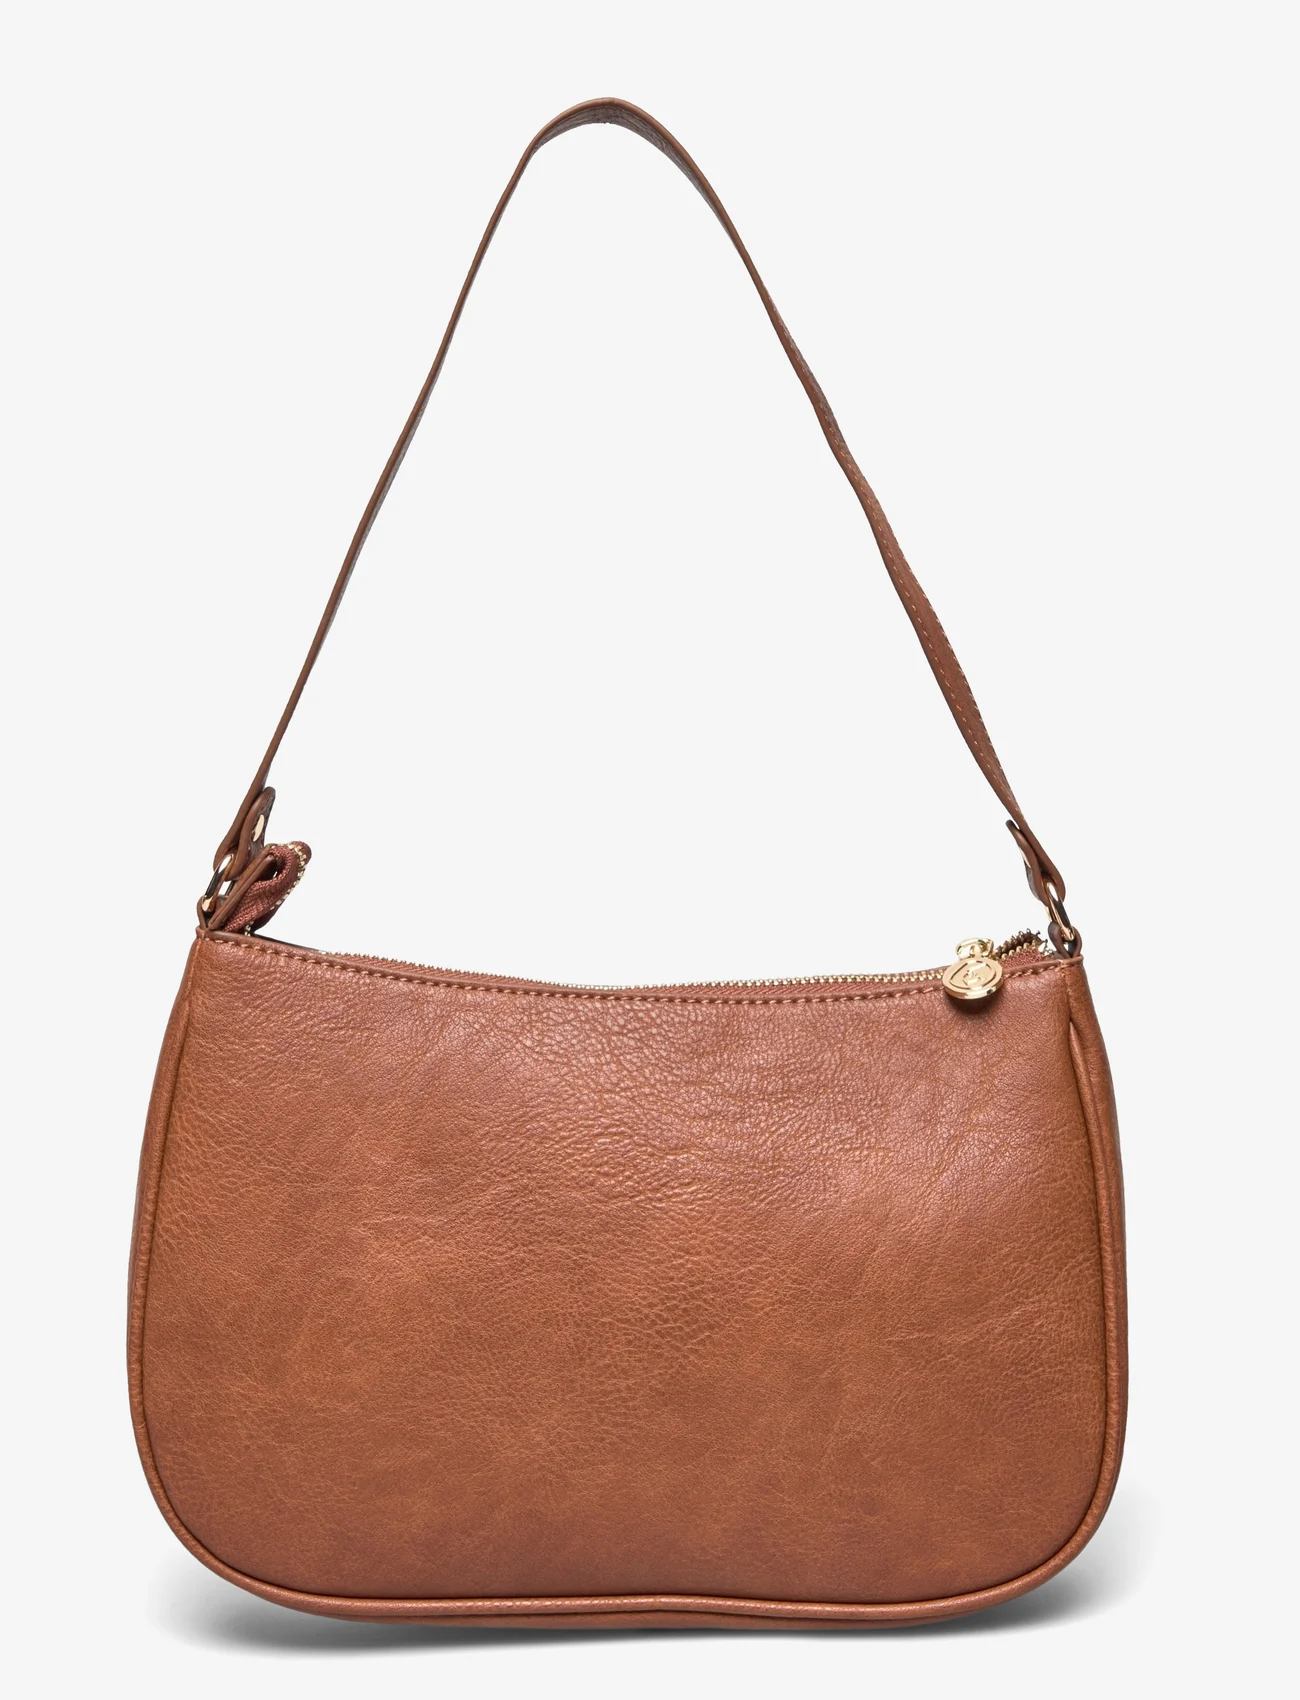 Rosemunde - Bag - birthday gifts - cocoa brown gold - 1